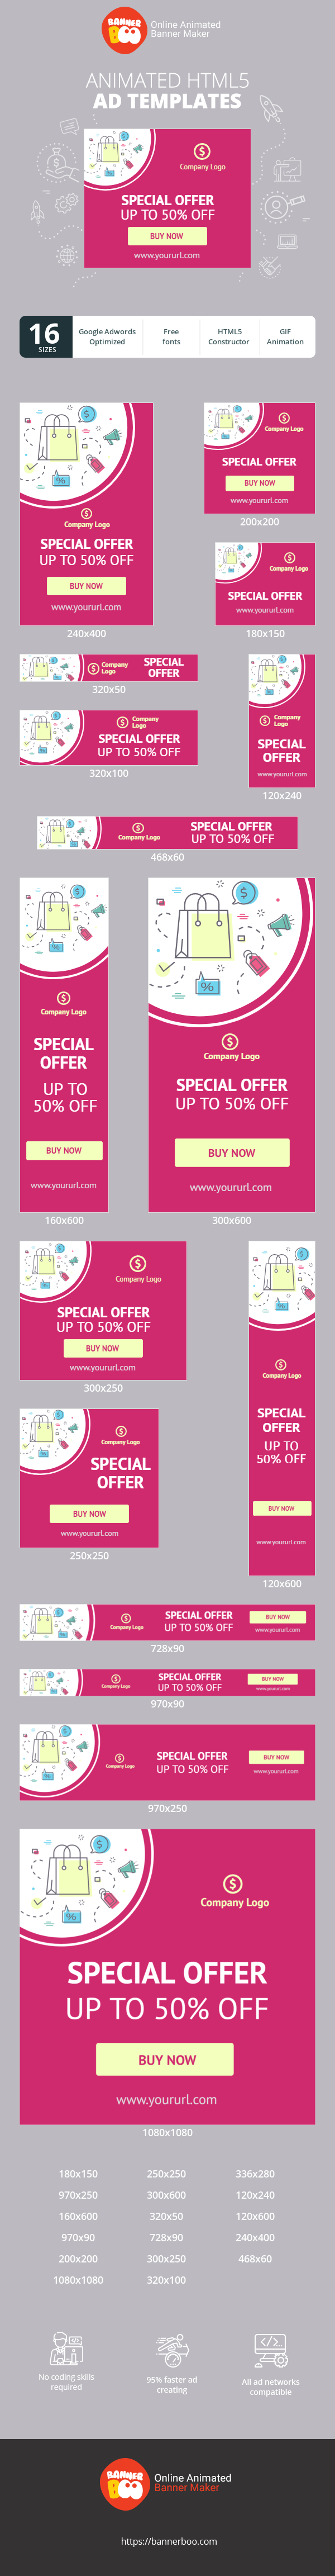 Banner ad template — Special Offer — up to 50% OFF